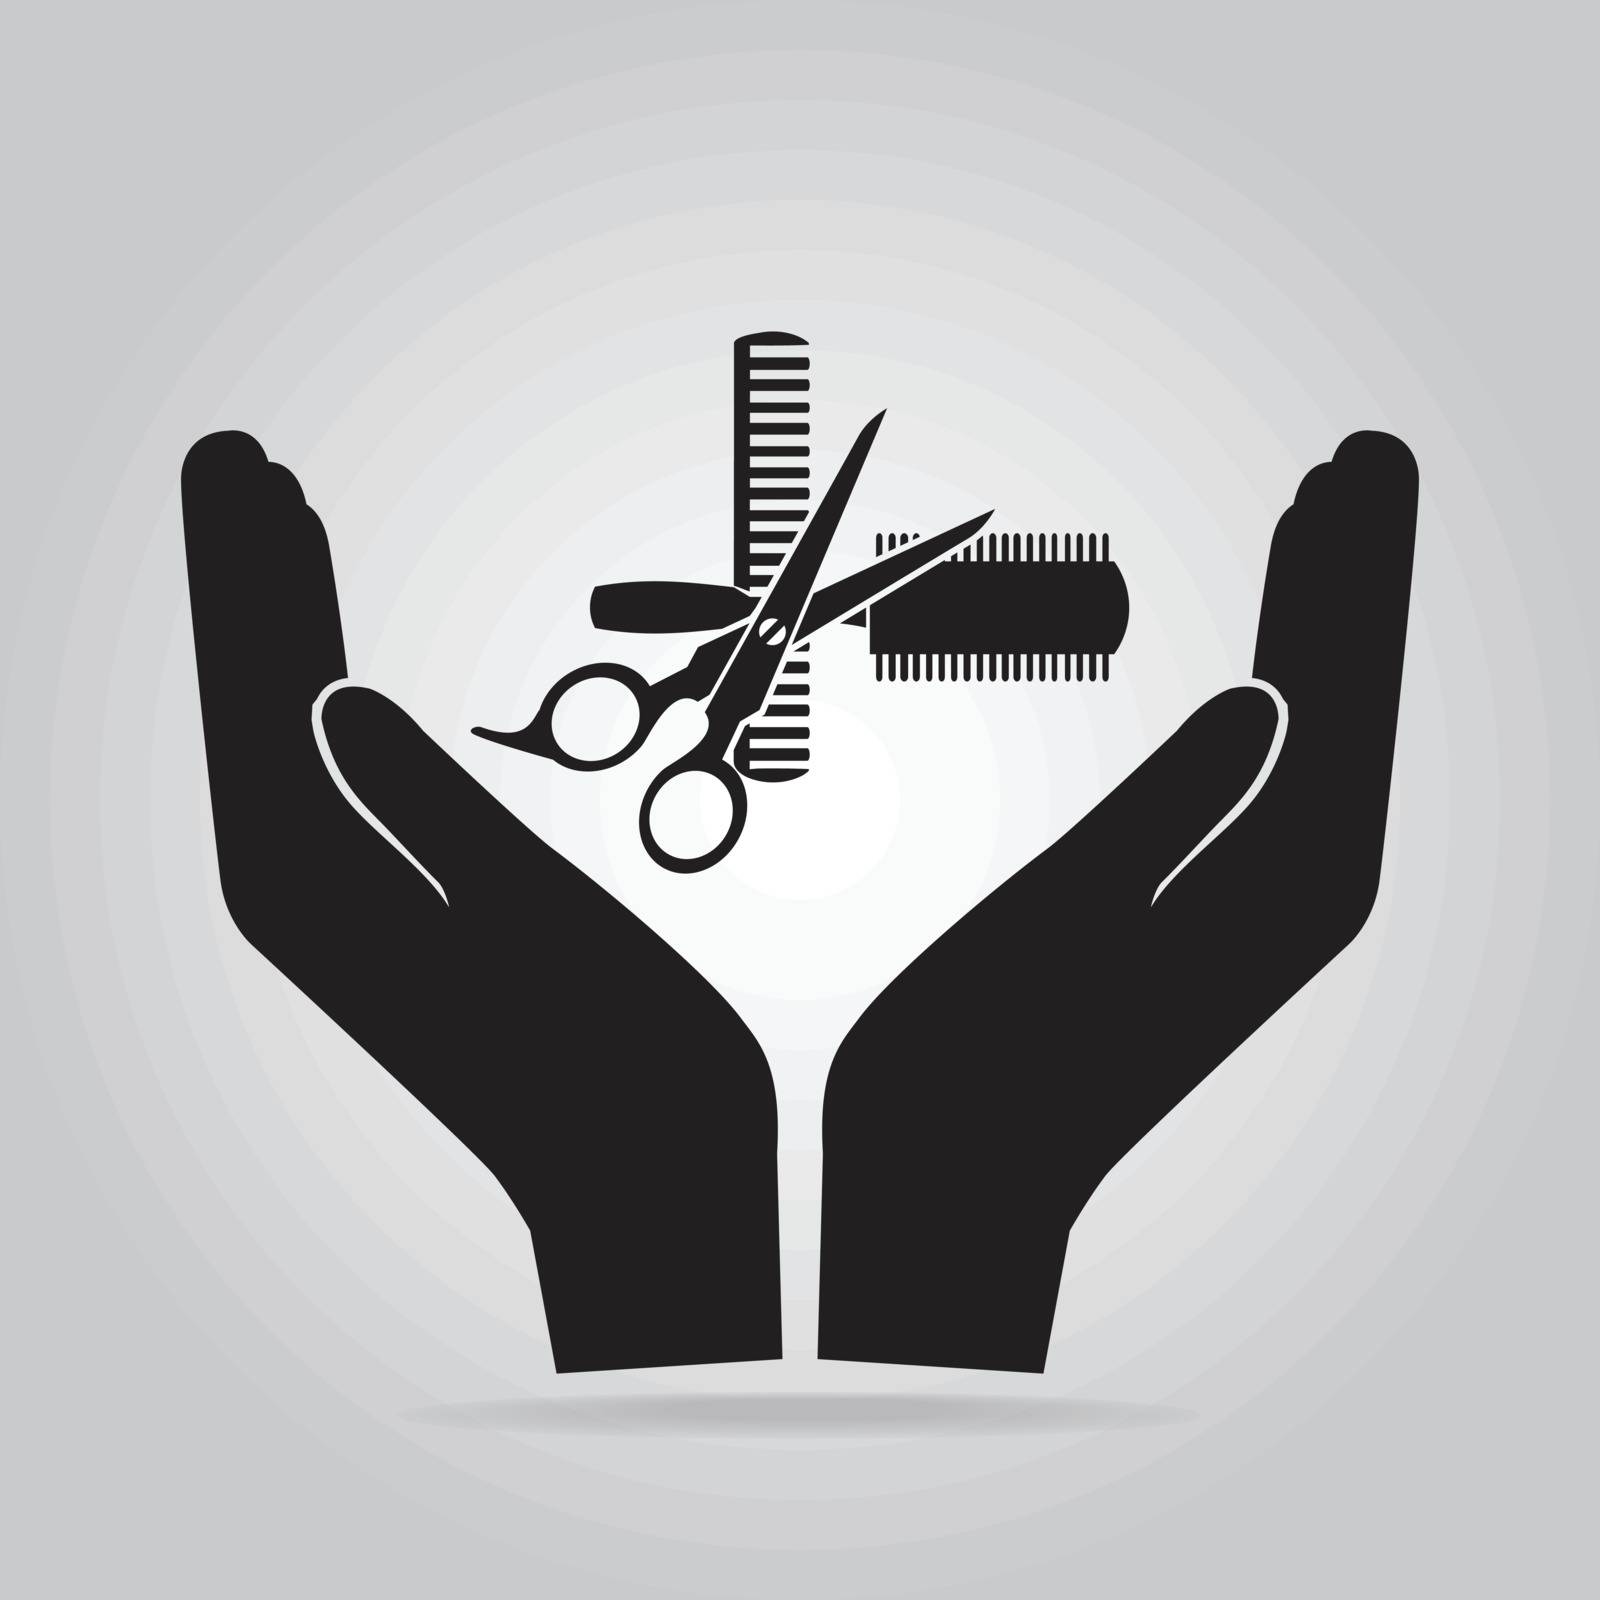 Hair salon with scissors and comb in hand icon, hair care concept